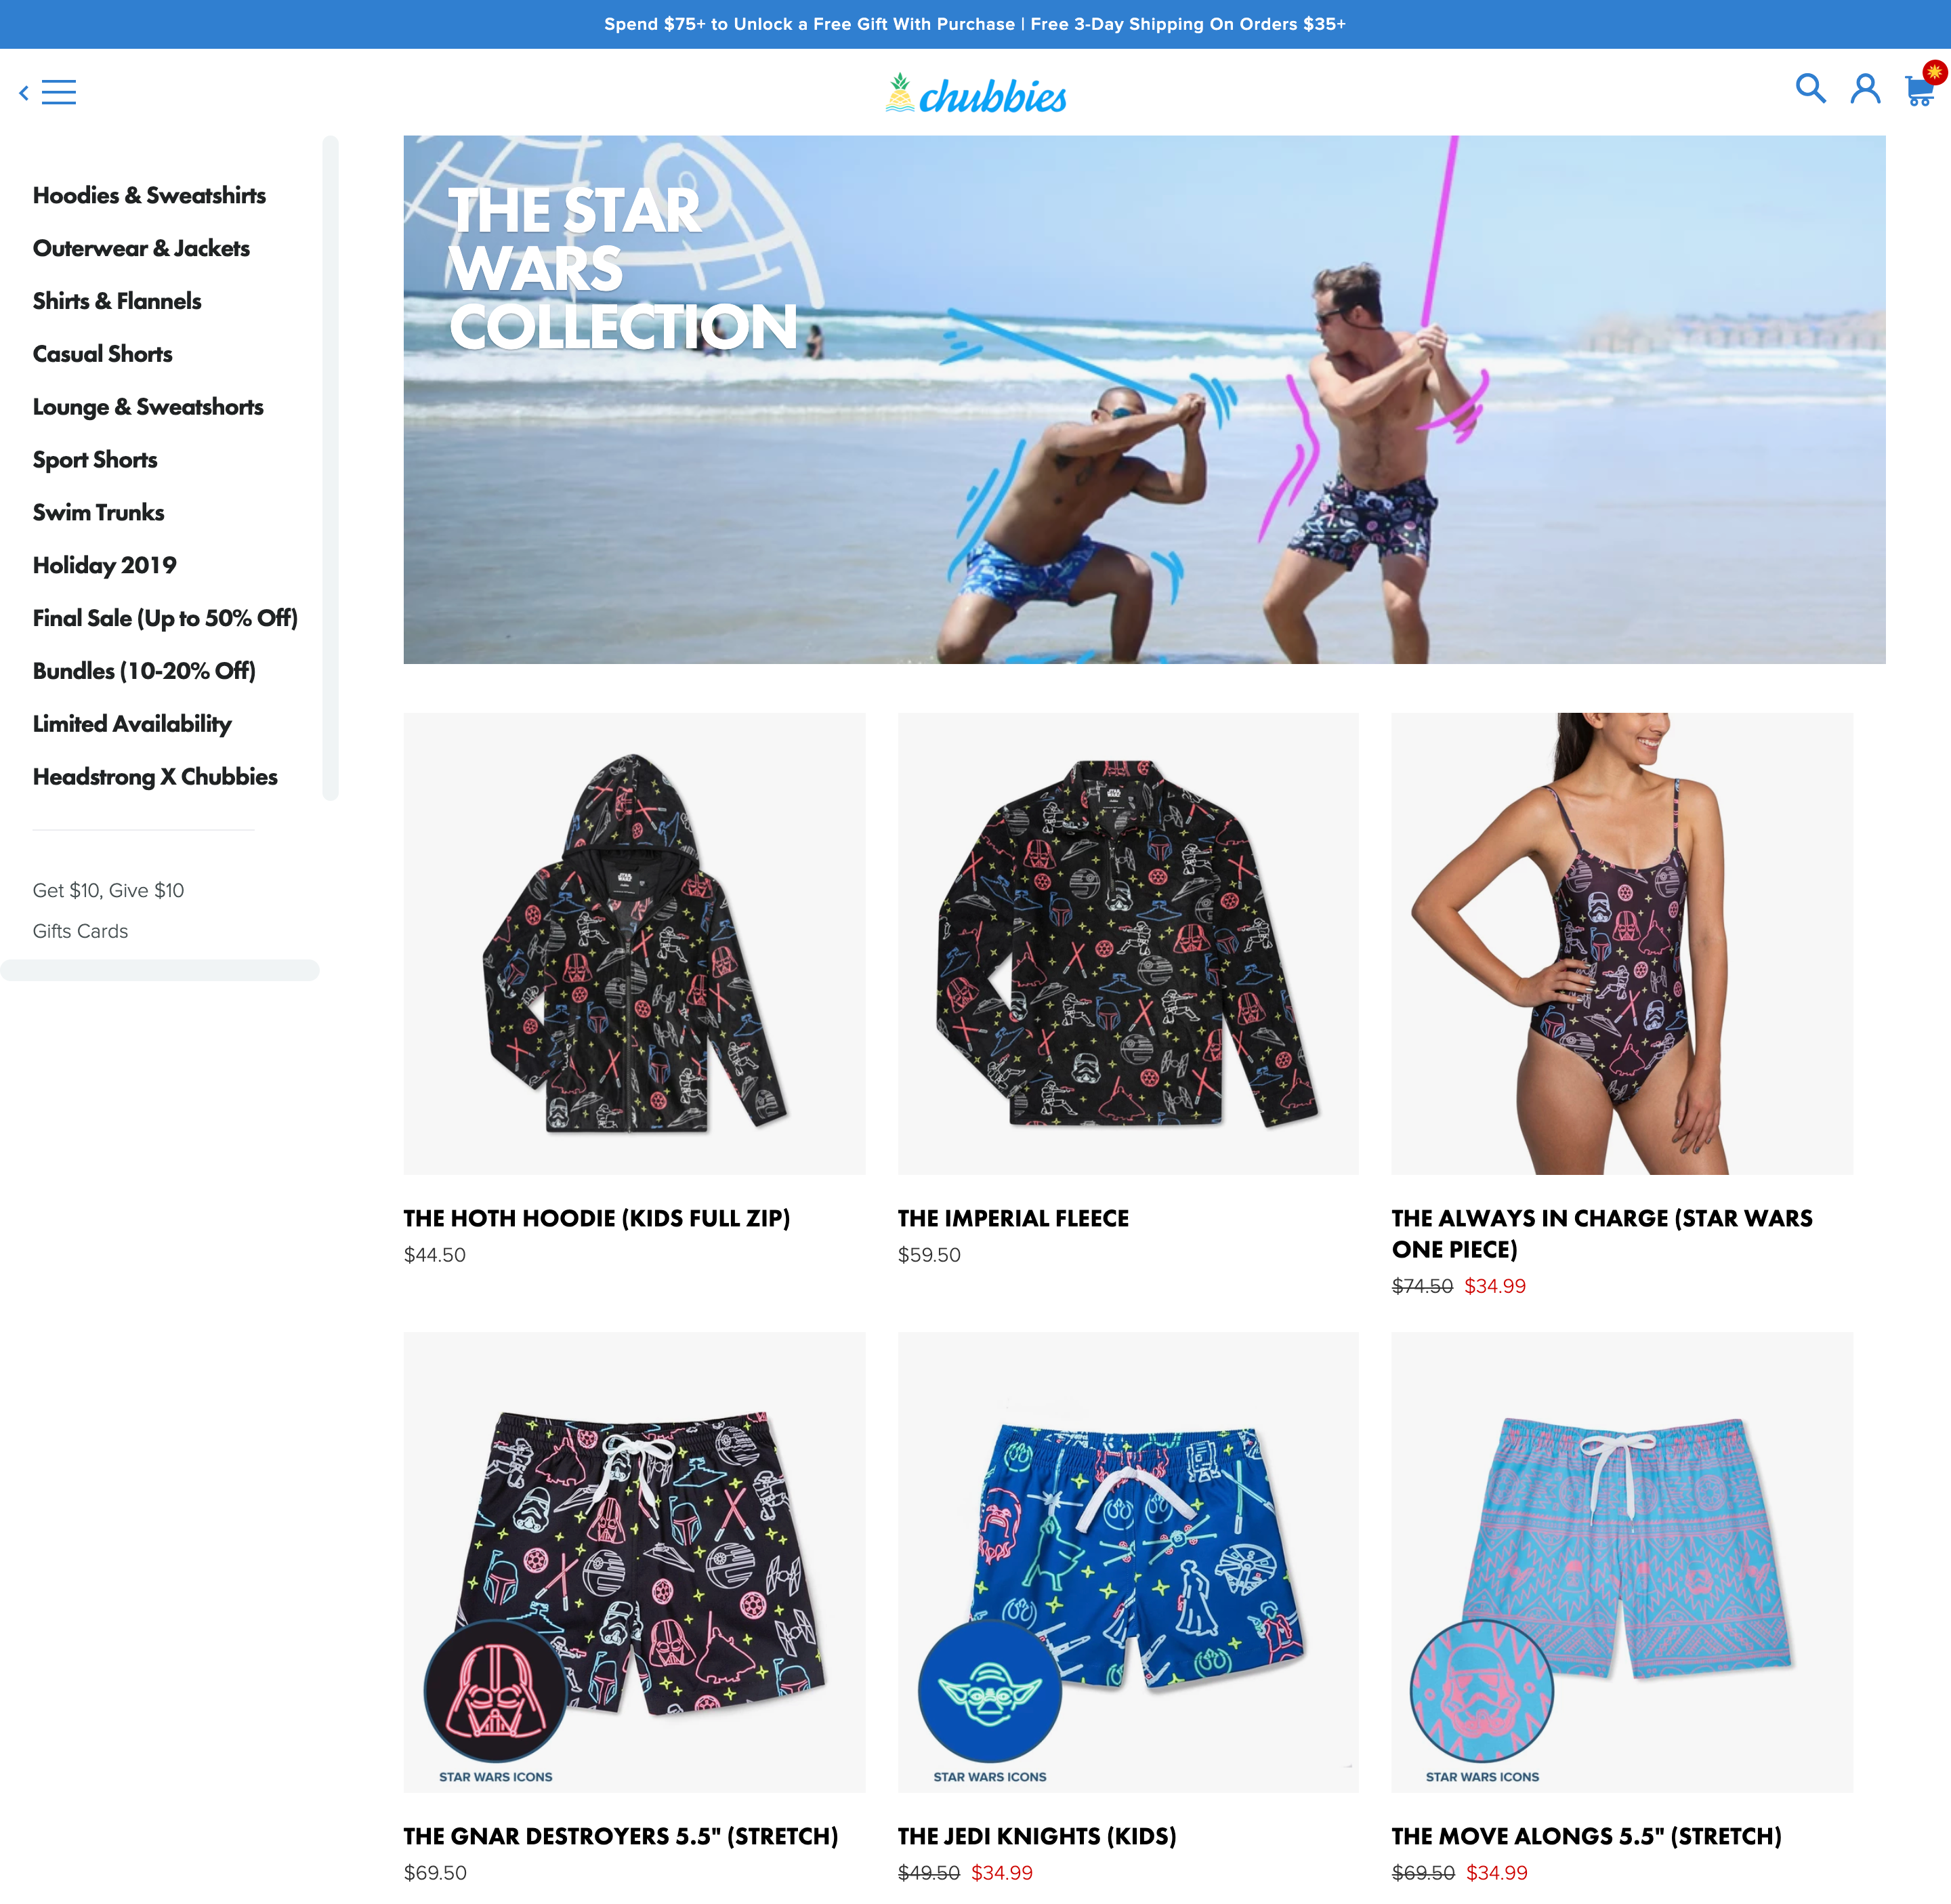 Collaborative Marketing Chubbies Star Wars Collection